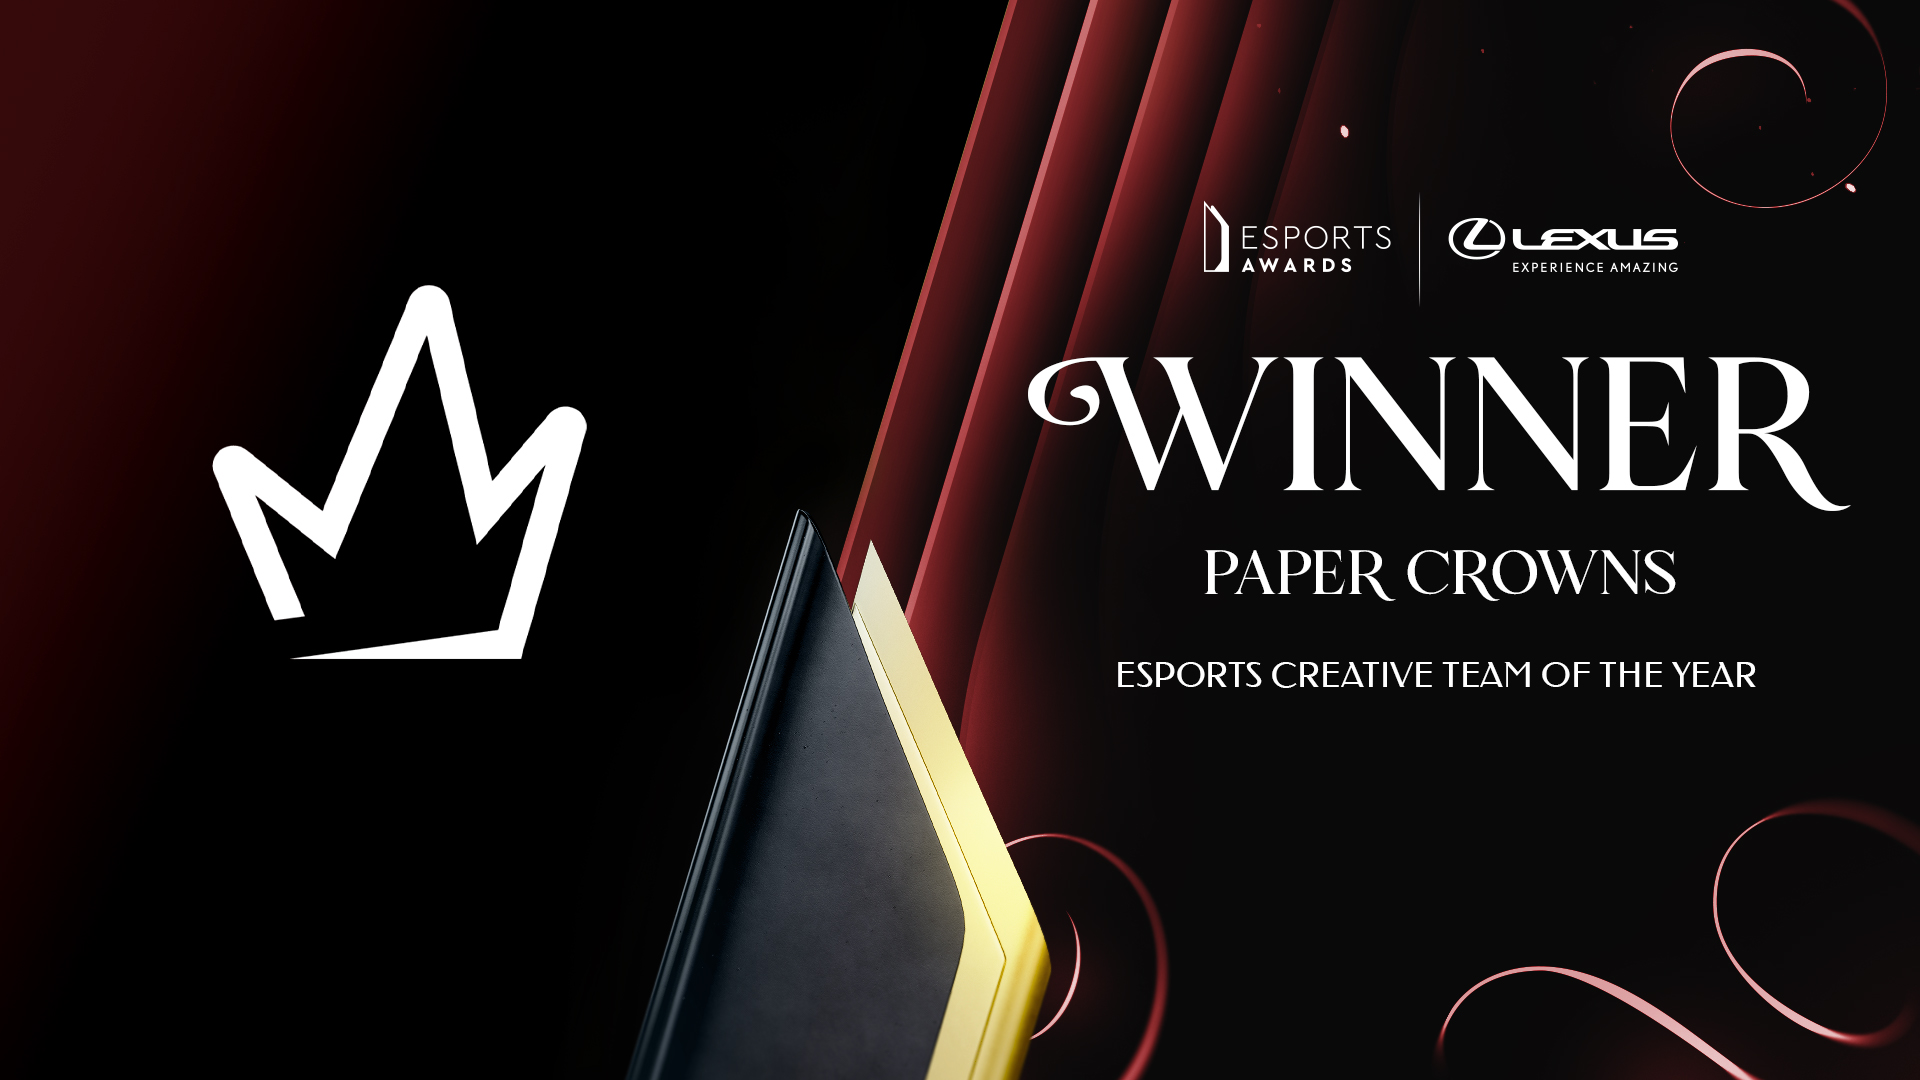 Esports Creative Team of the Year: Paper Crowns